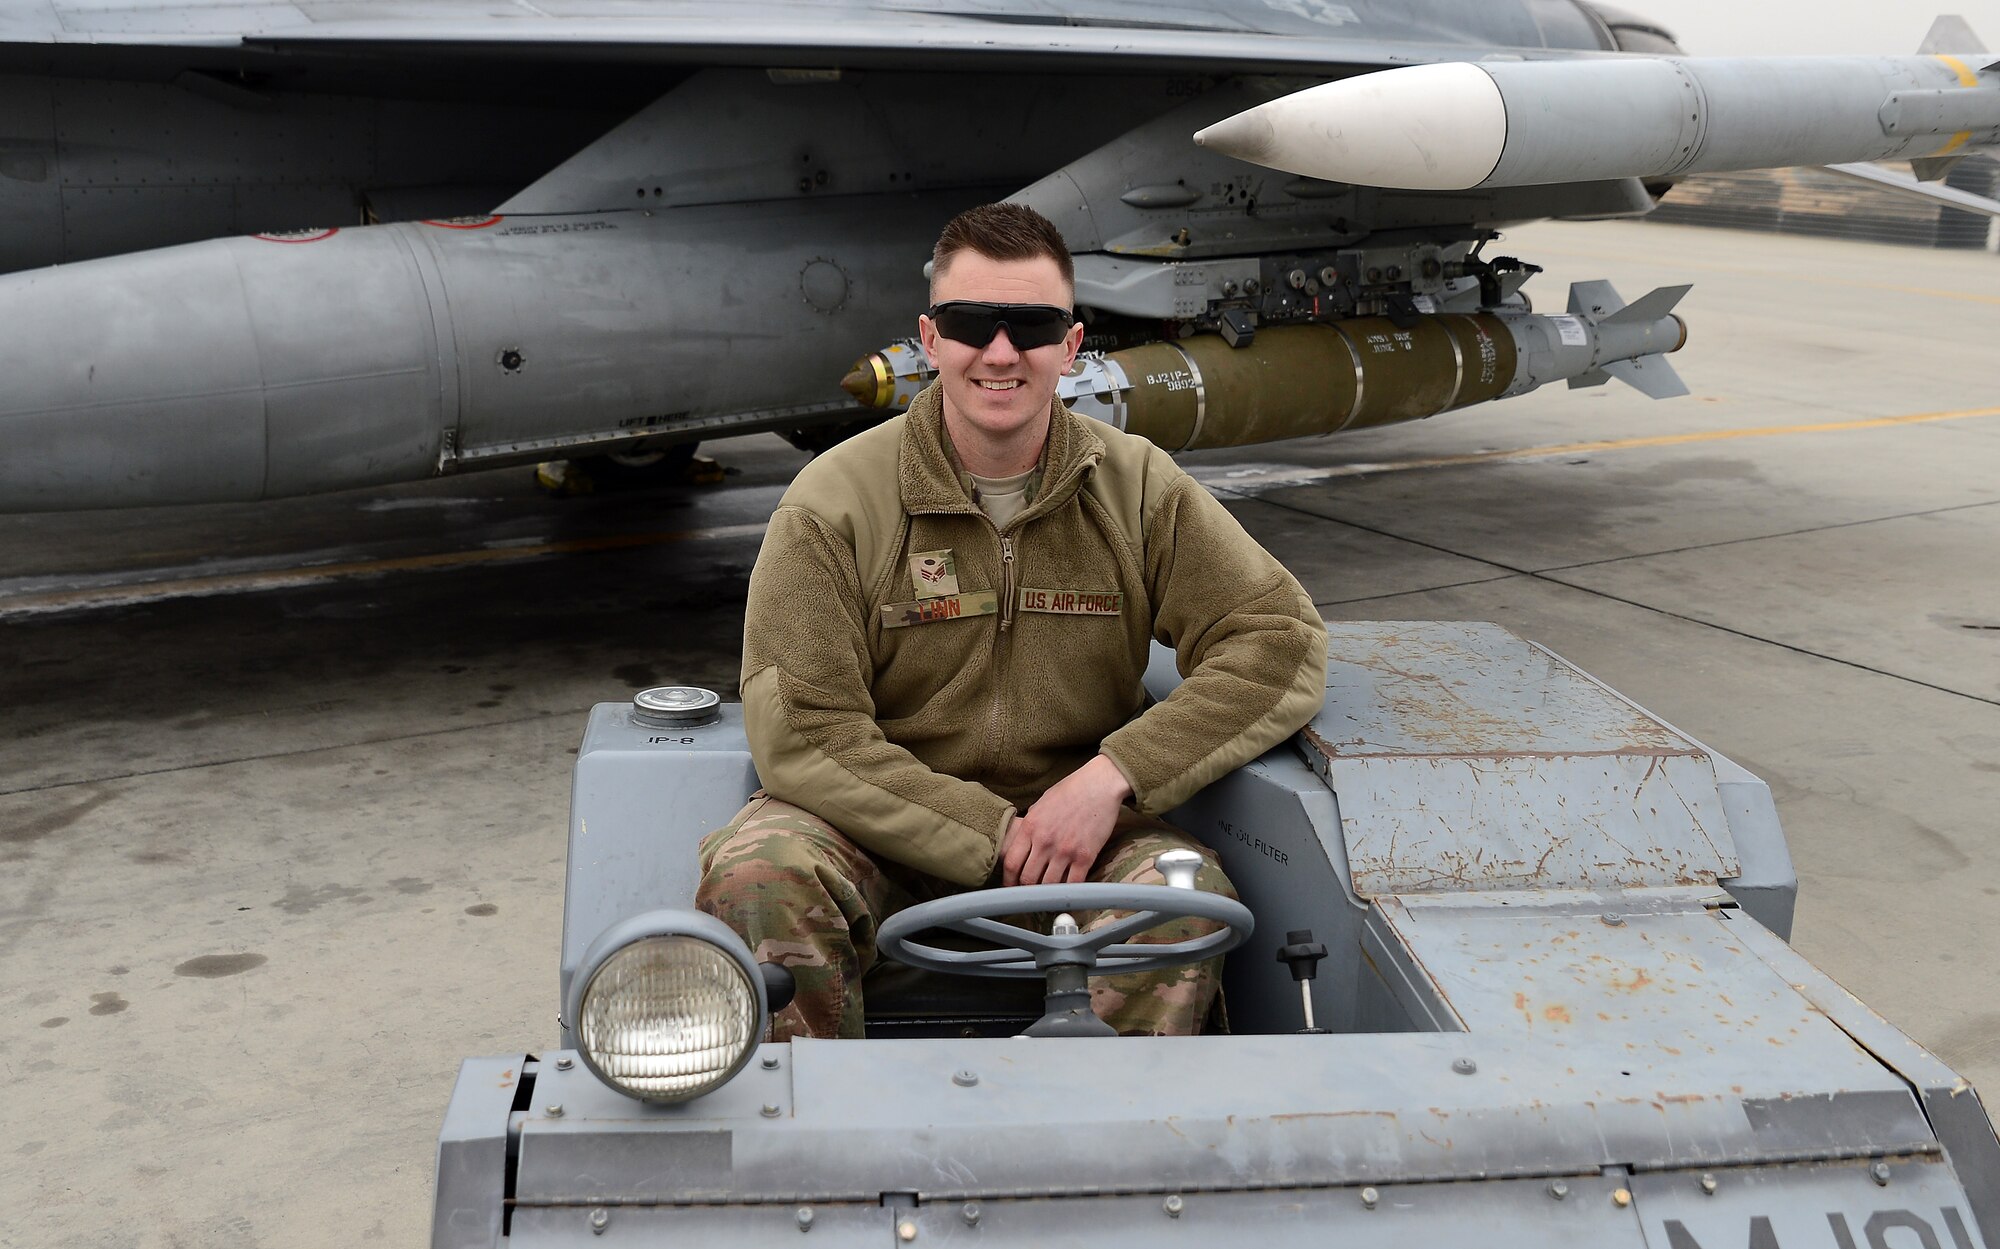 Senior Airman Kaleb Linn, 455th Expeditionary Aircraft Maintenance Squadron weapons load crew member, poses for a photo Jan. 4, 2018 at Bagram Airfield, Afghanistan.